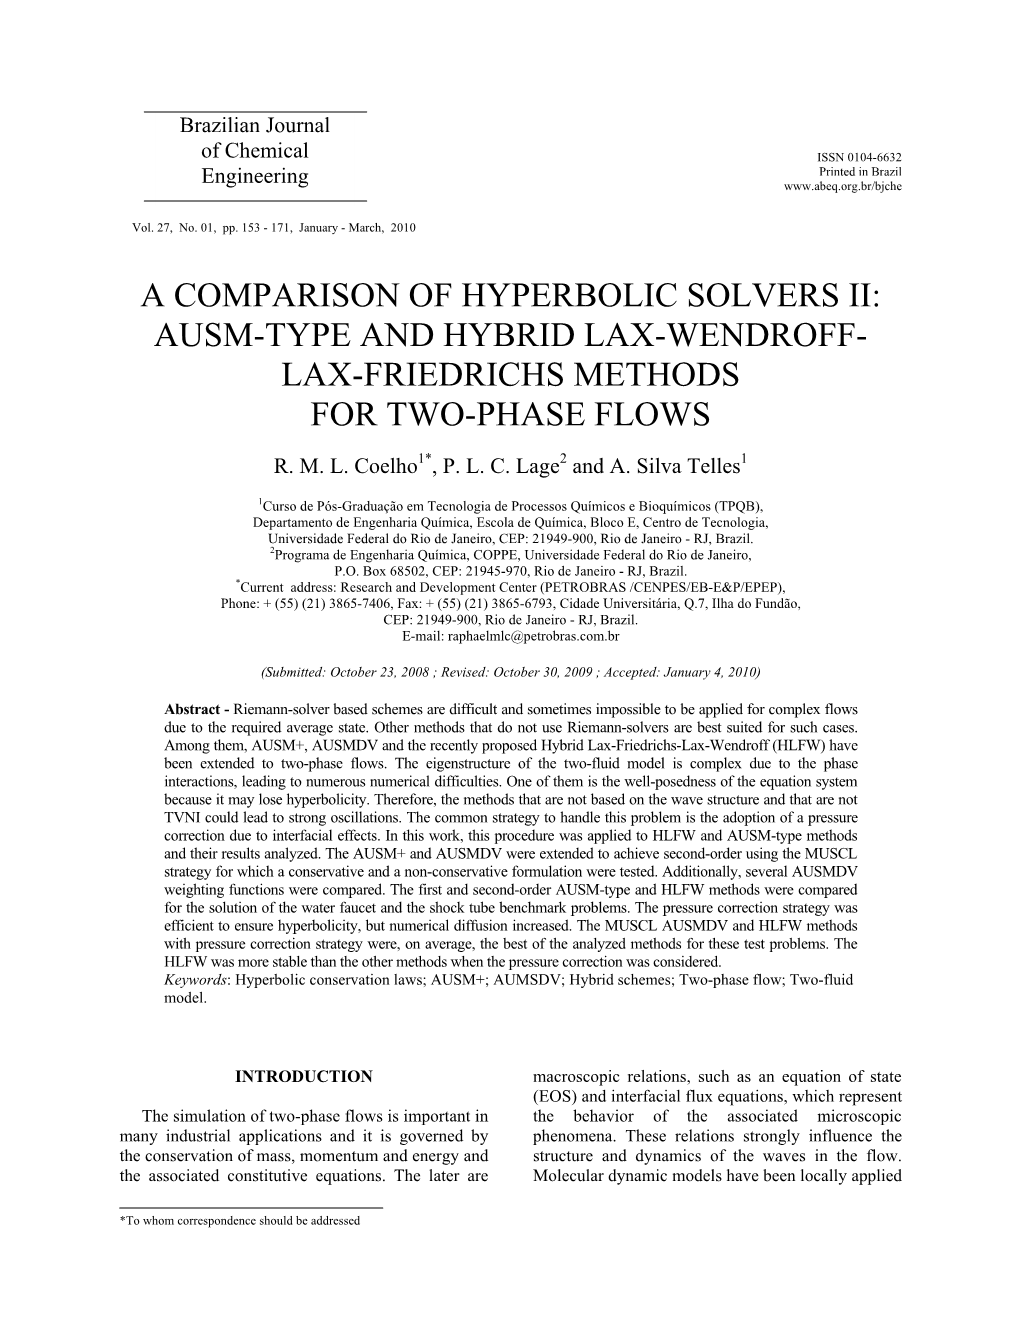 A Comparison of Hyperbolic Solvers Ii: Ausm-Type and Hybrid Lax-Wendroff- Lax-Friedrichs Methods for Two-Phase Flows